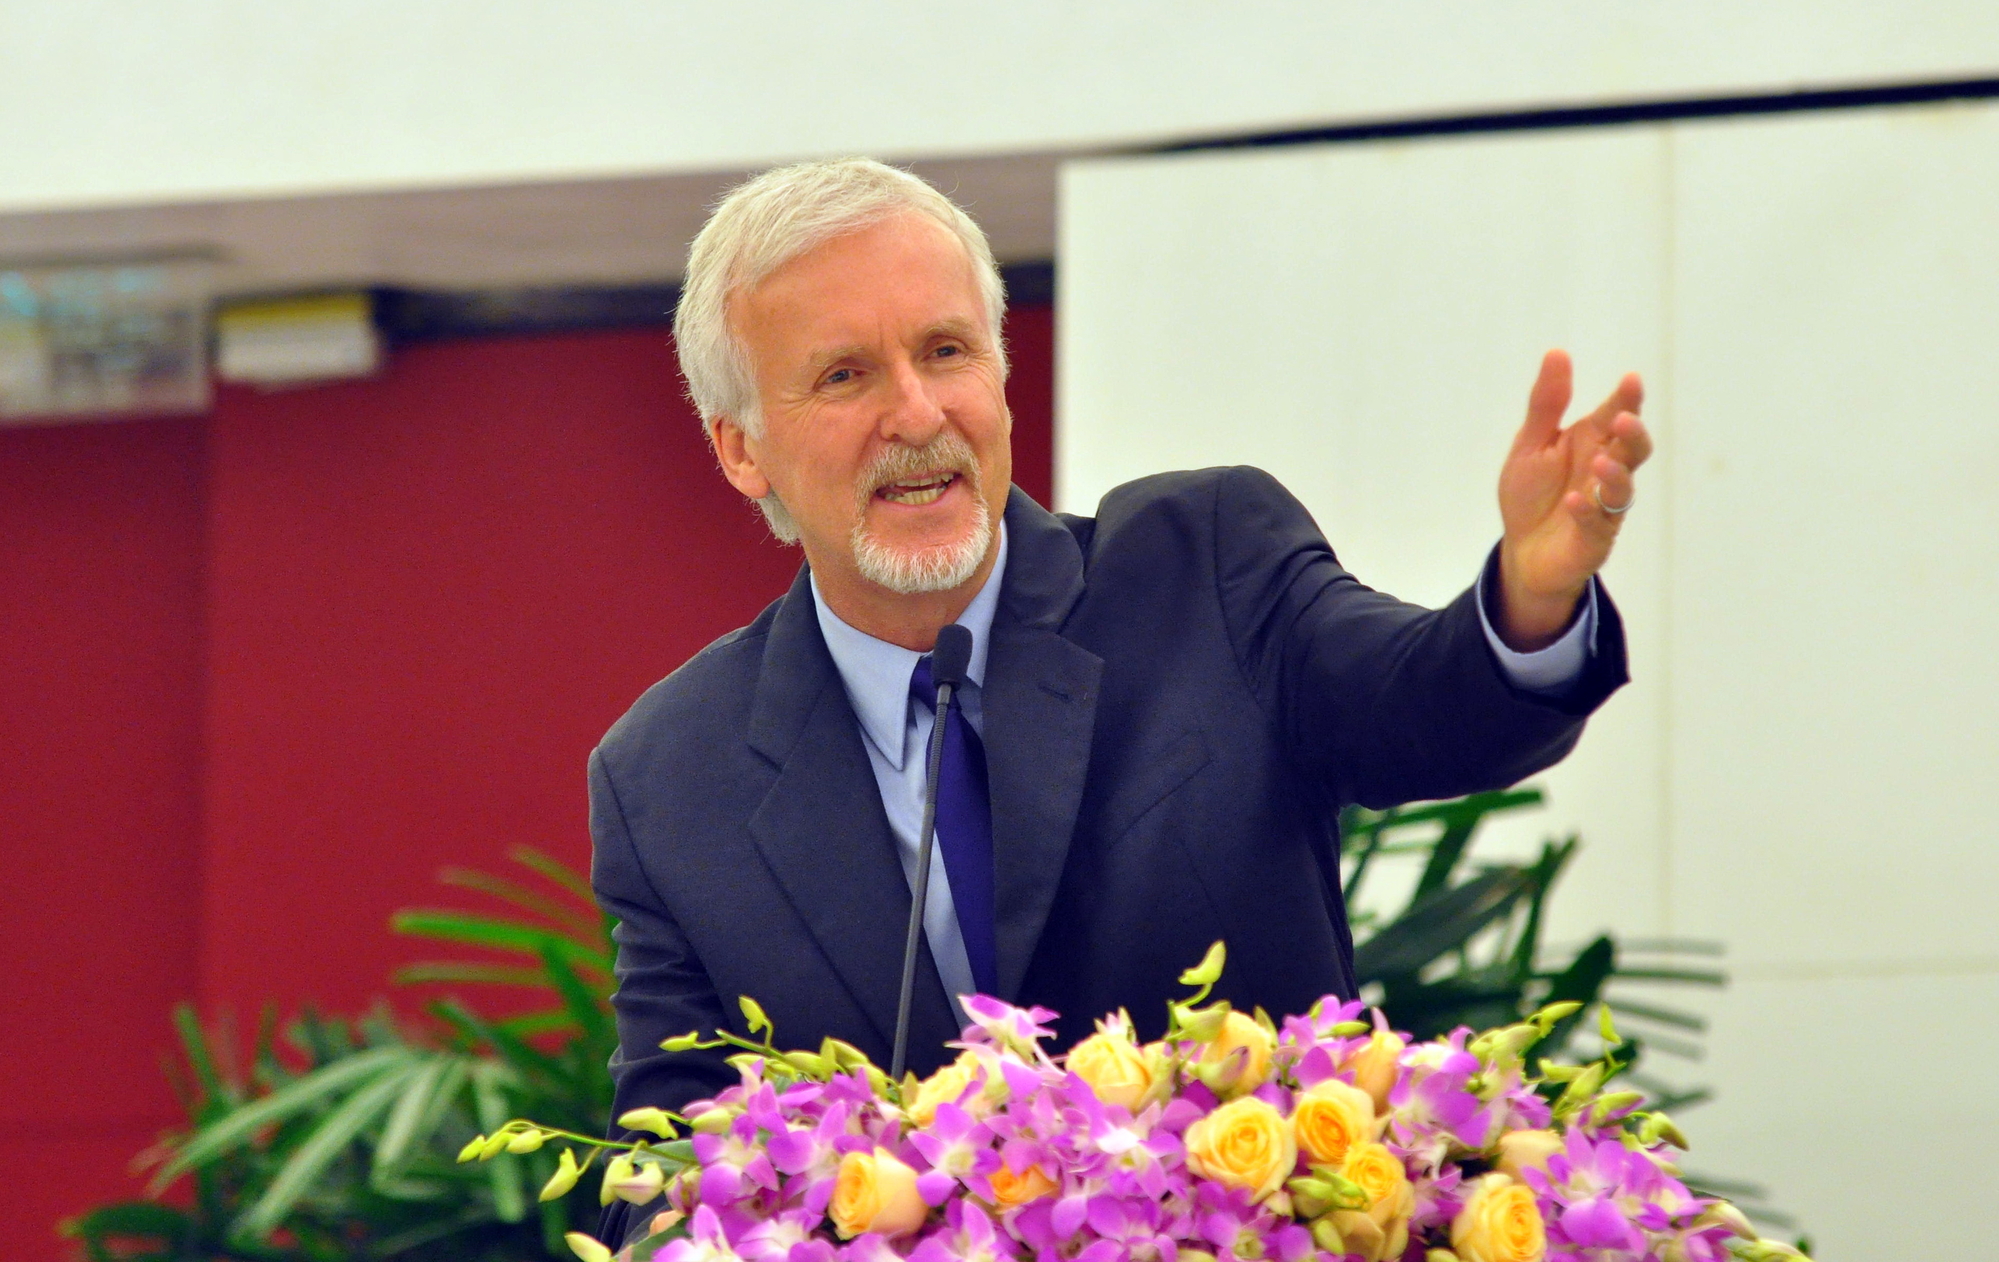 Canadian director James Cameron delivers a speech at a launch ceremony for the Cameron Pace Group China and a signing ceremony between Cameron Pace Group and Tianjin North Film Group and Tianjing Binhai Hi-Tech Development Group in Beijing, China, 8 August 2012. Oscar-winning director James Cameron said on Wednesday (8 August 2012) that he will open a joint venture in China to provide 3D filming technology, the latest move by Hollywood to secure a foothold in the countrys booming movie industry. Box office revenues, growing by leaps and bounds in China thanks to its fast-growing middle class, have whet Hollywoods appetite despite complaints over government restrictions on access to screens, content control and piracy. CPG China Division, the new arm of Cameron Pace Group, will offer Chinese film makers three-dimensional camera technology but will not be involved immediately in producing films.